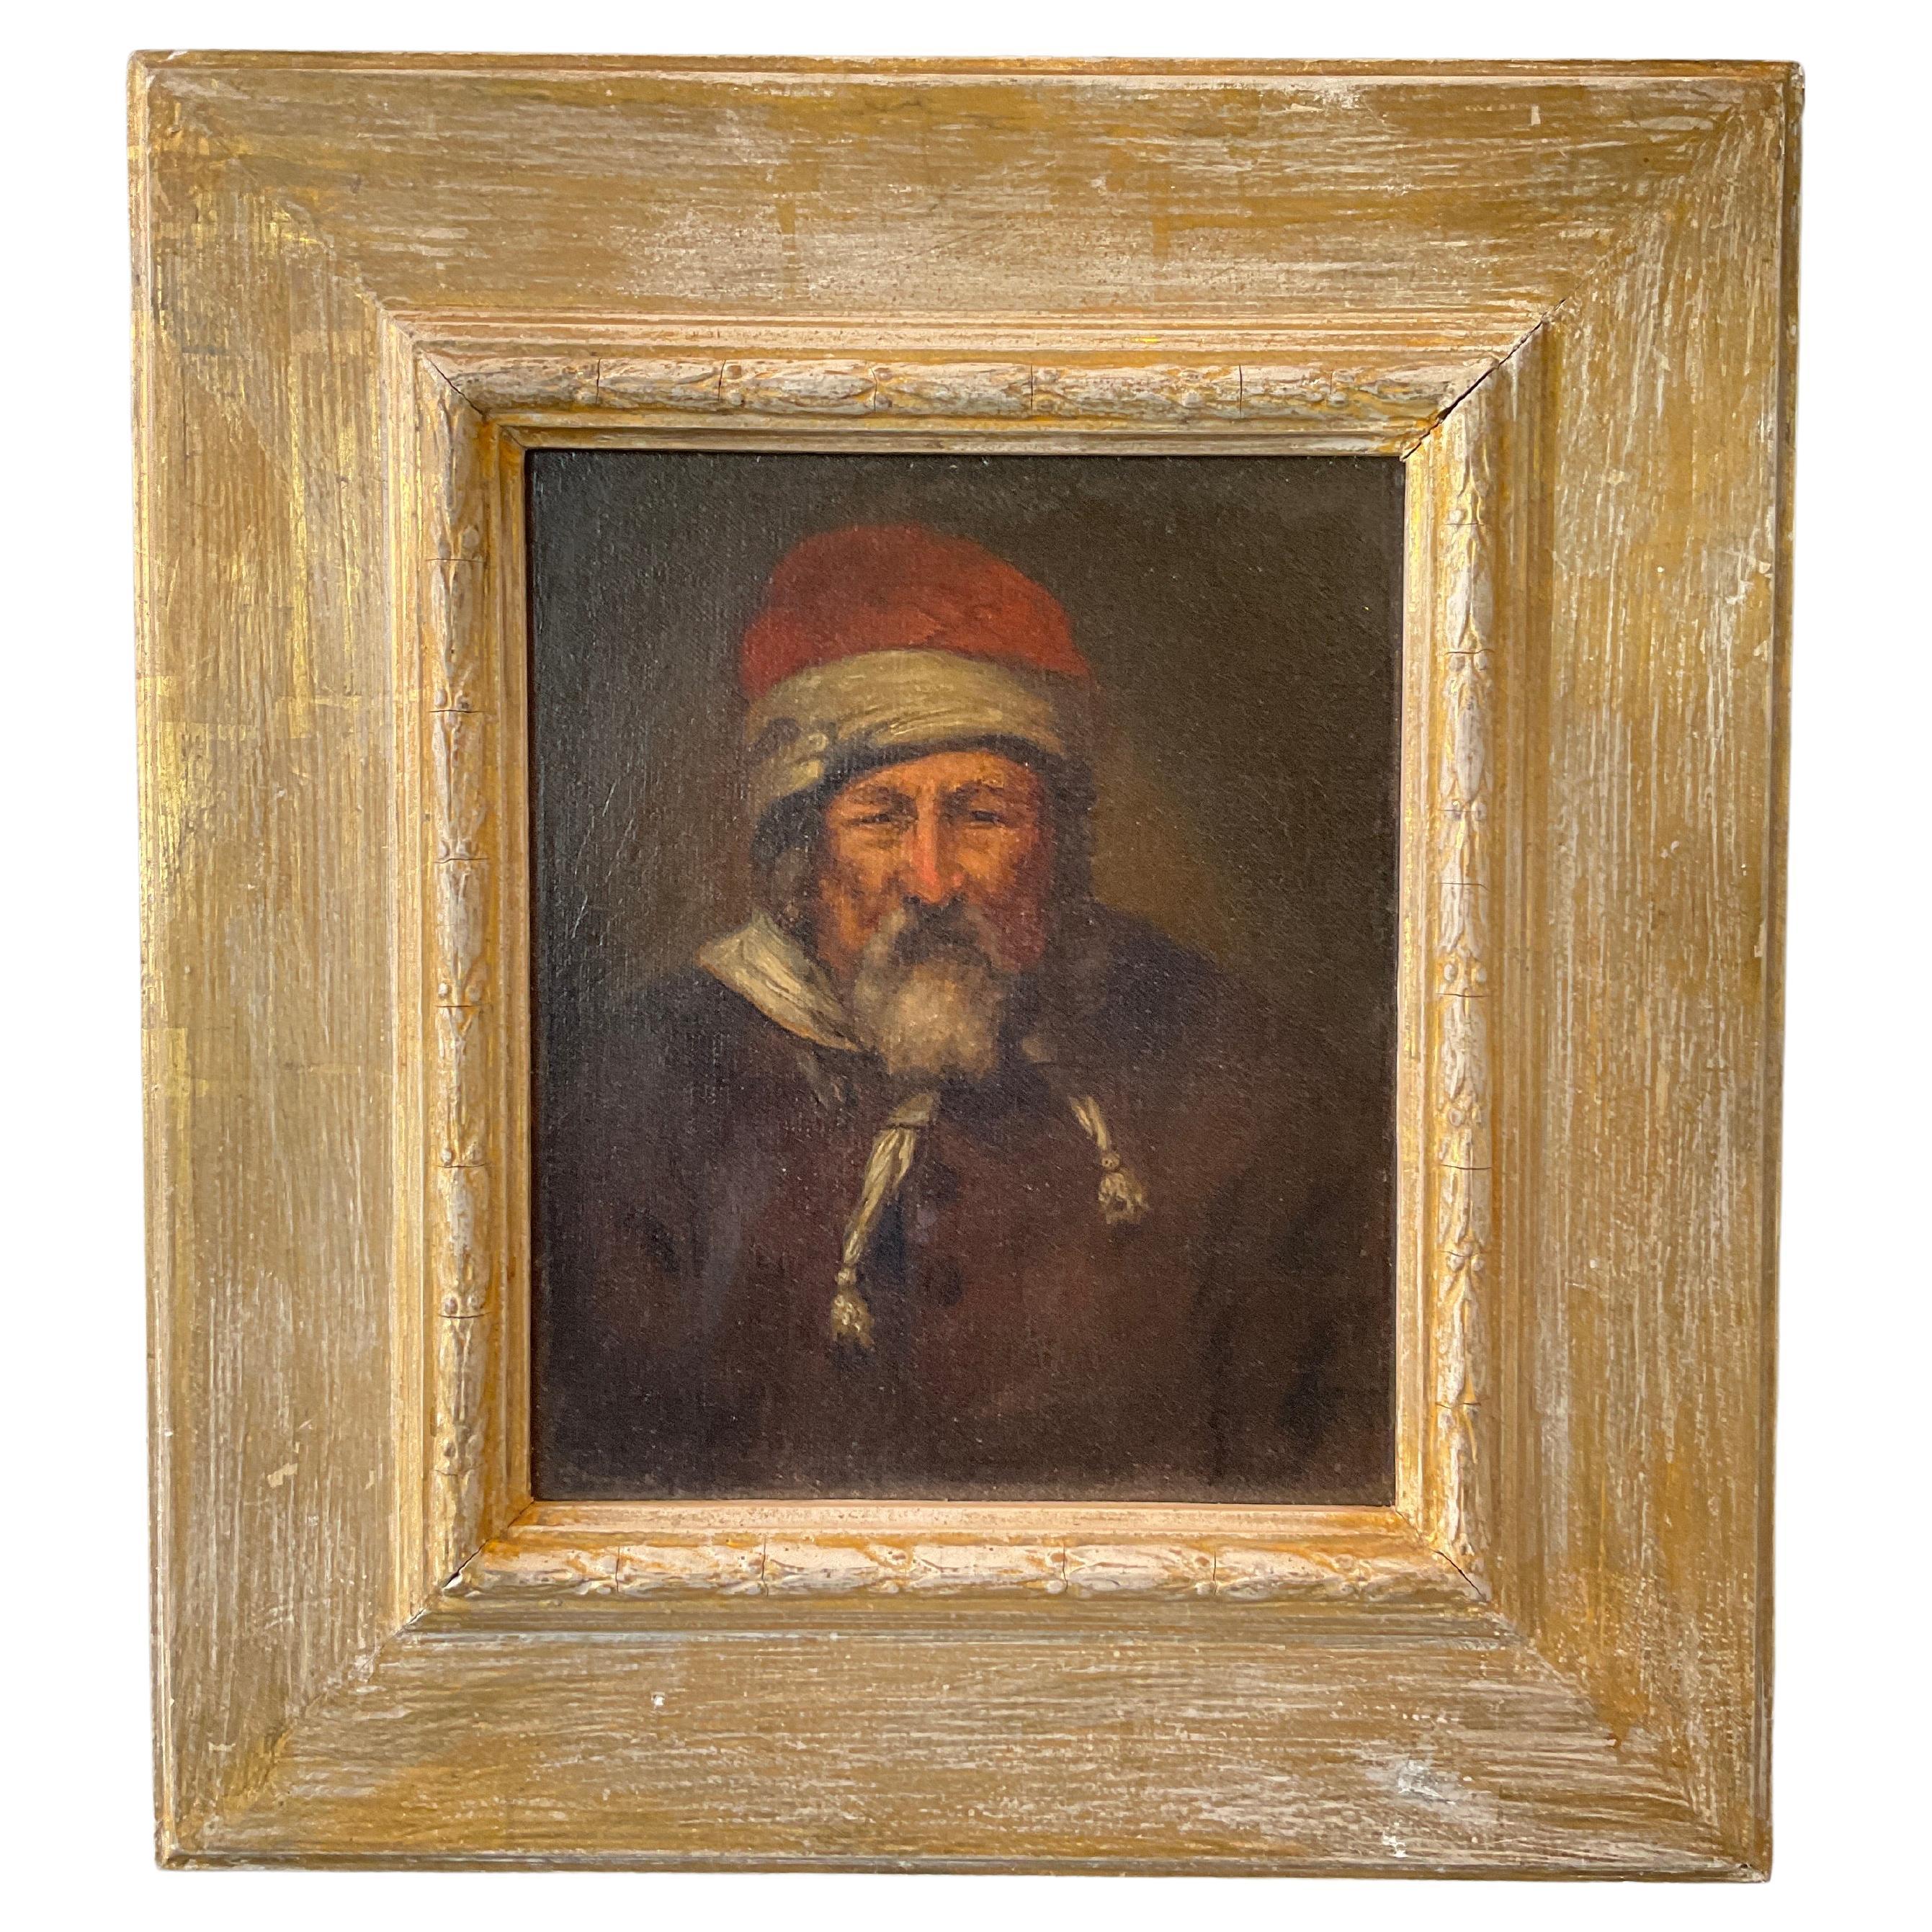 Oil Painting Of A 1600s Dutch Older Man On Board 